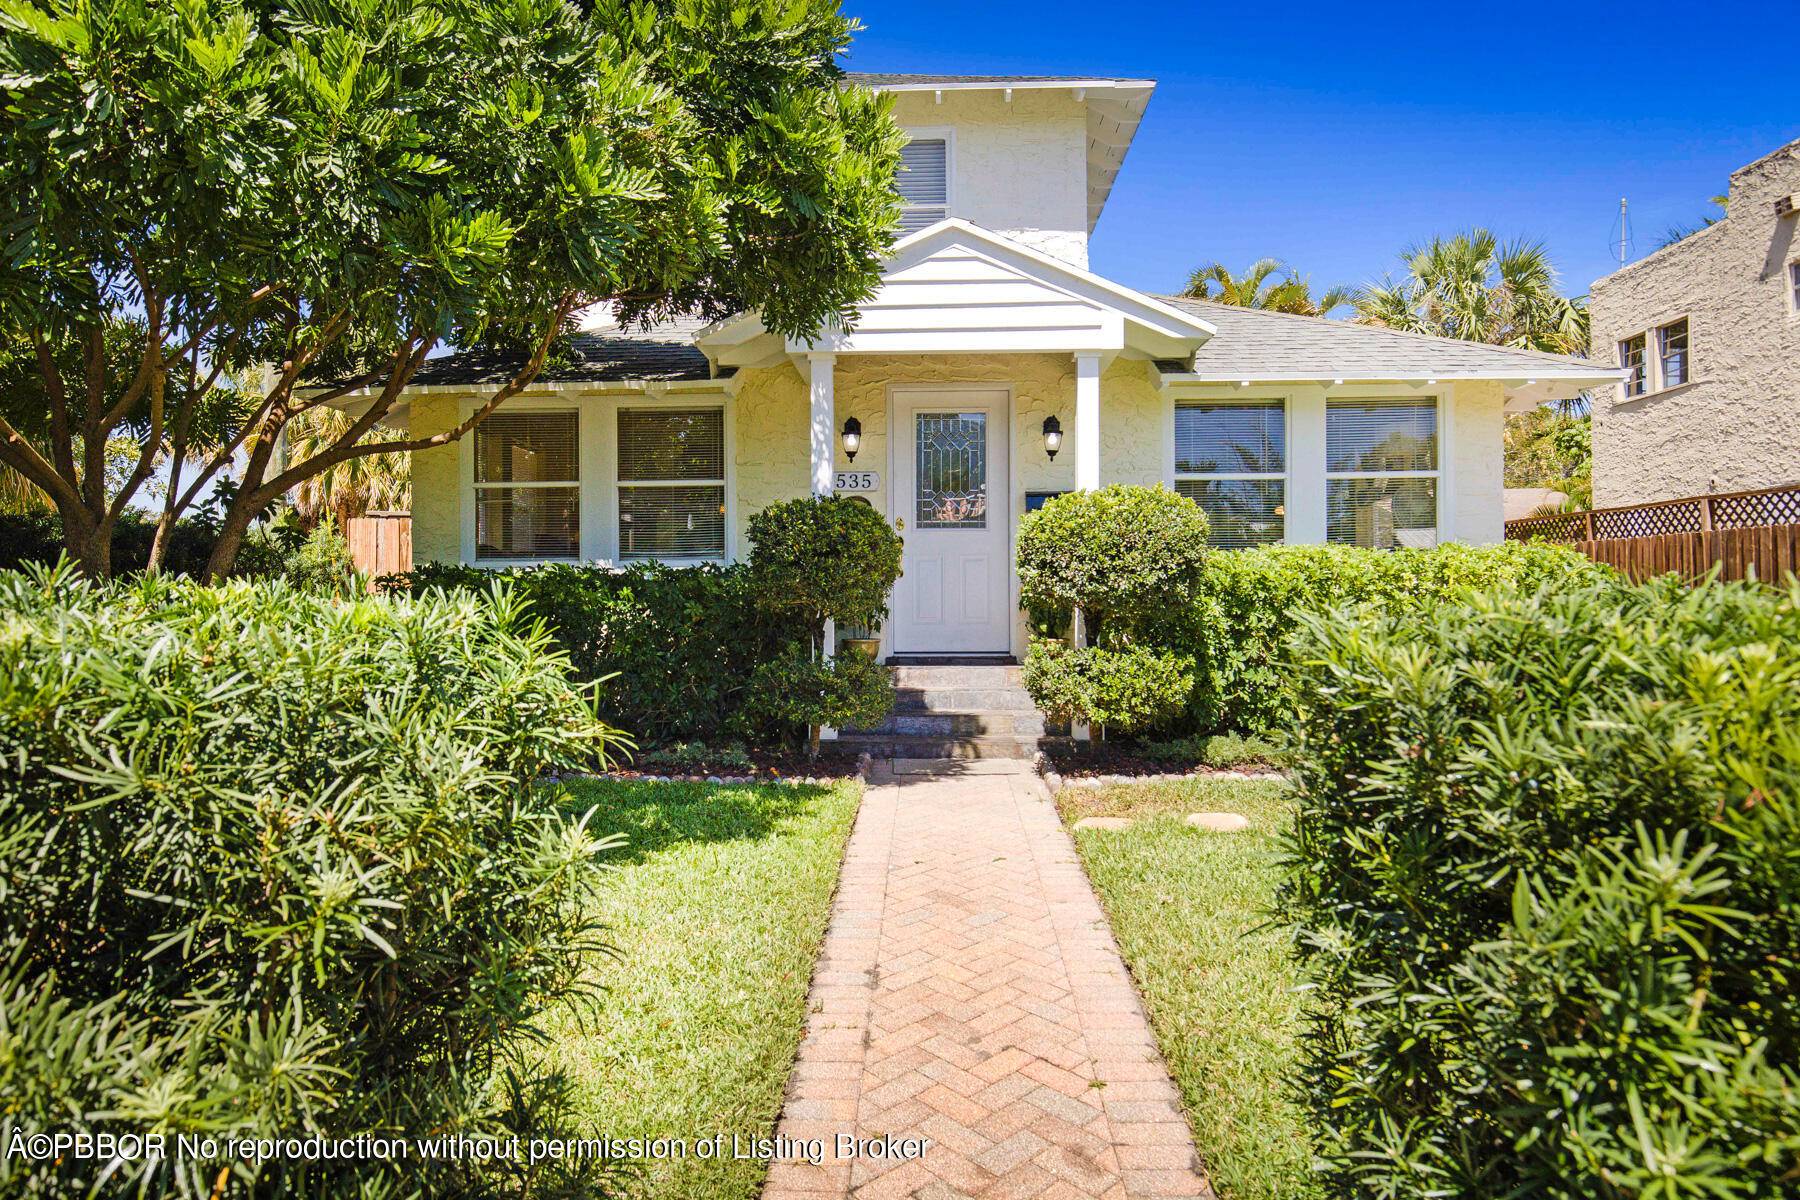 Classic bright two story Mediterranean home in charming historic old Northwood.